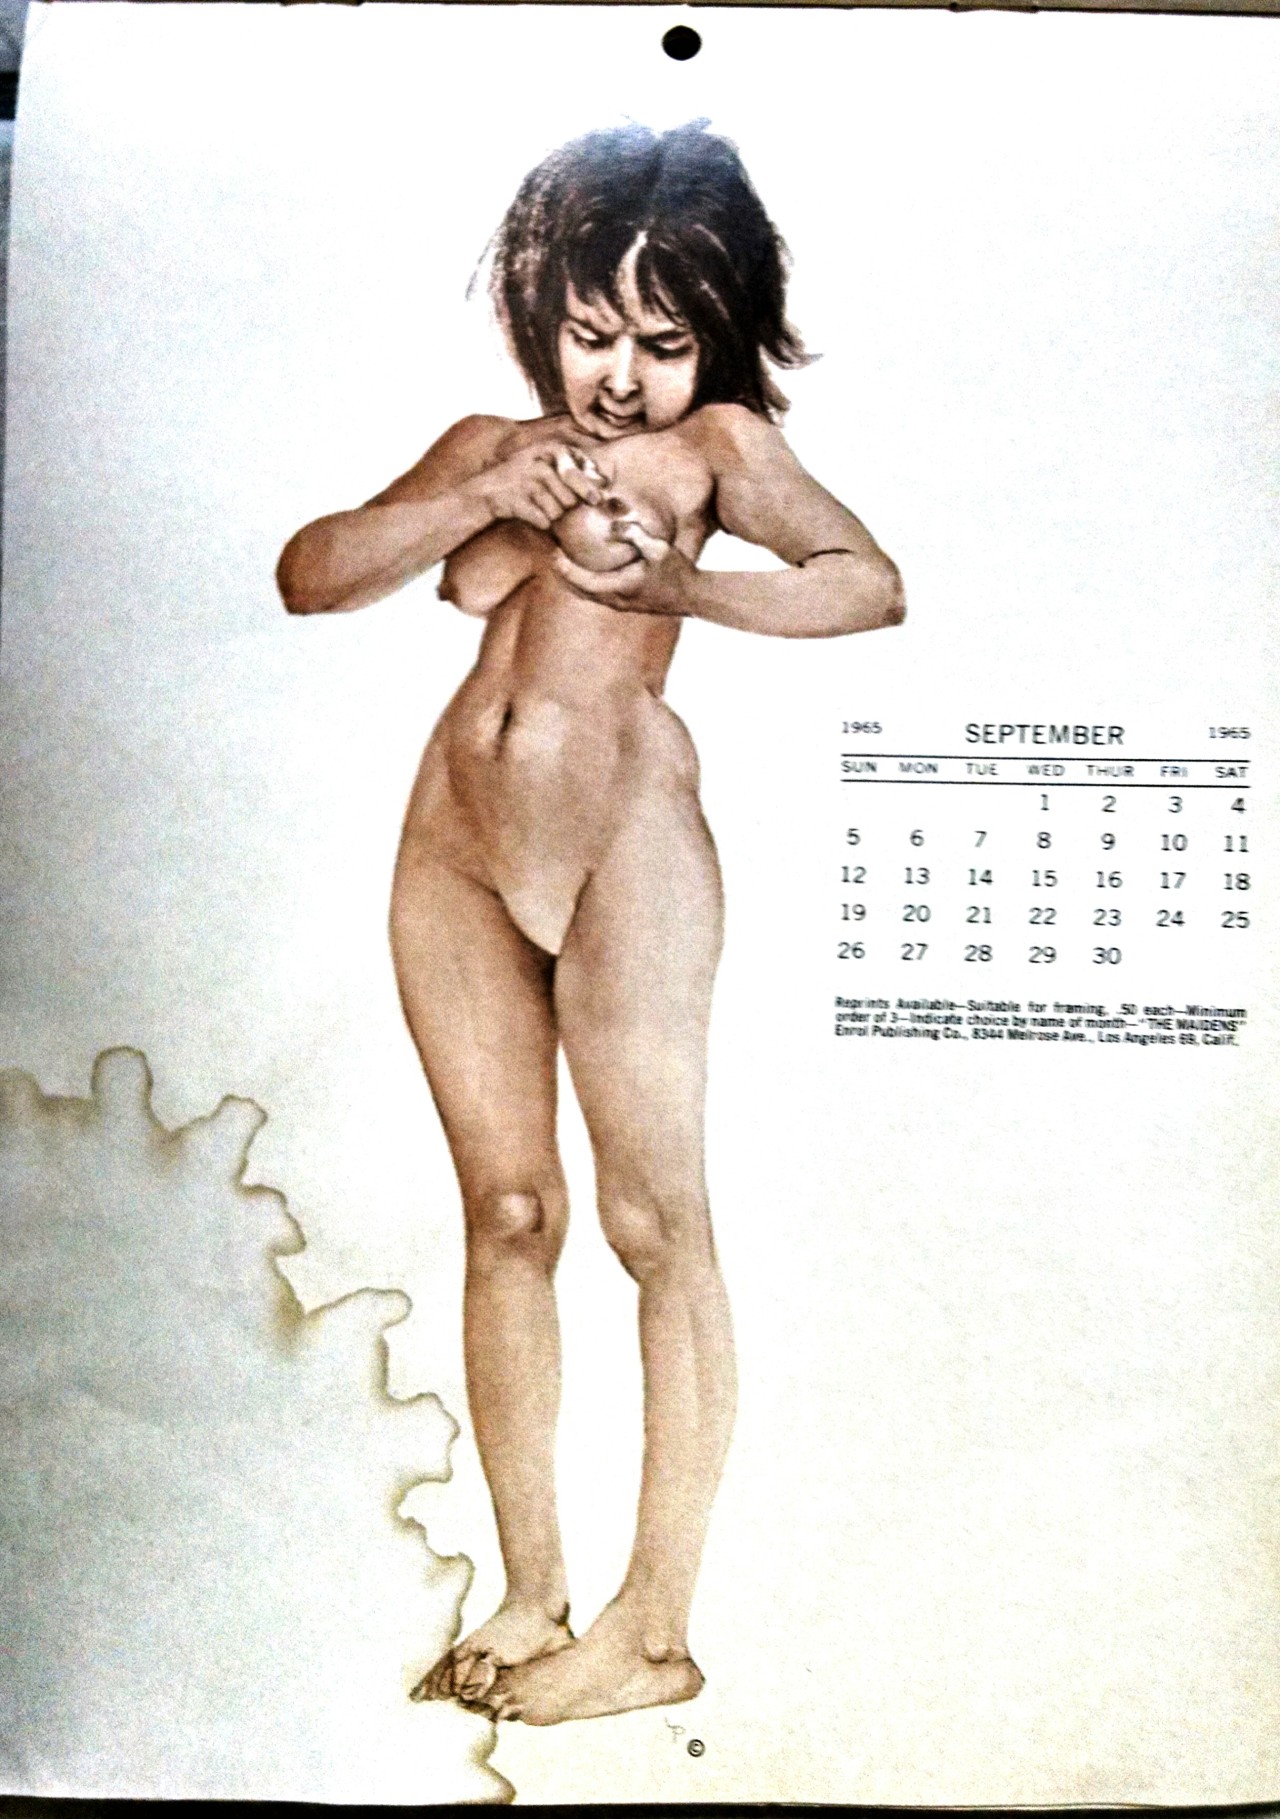 Miss September from: &ldquo;The Maidens 1965 Calendar: A portfolio of selected